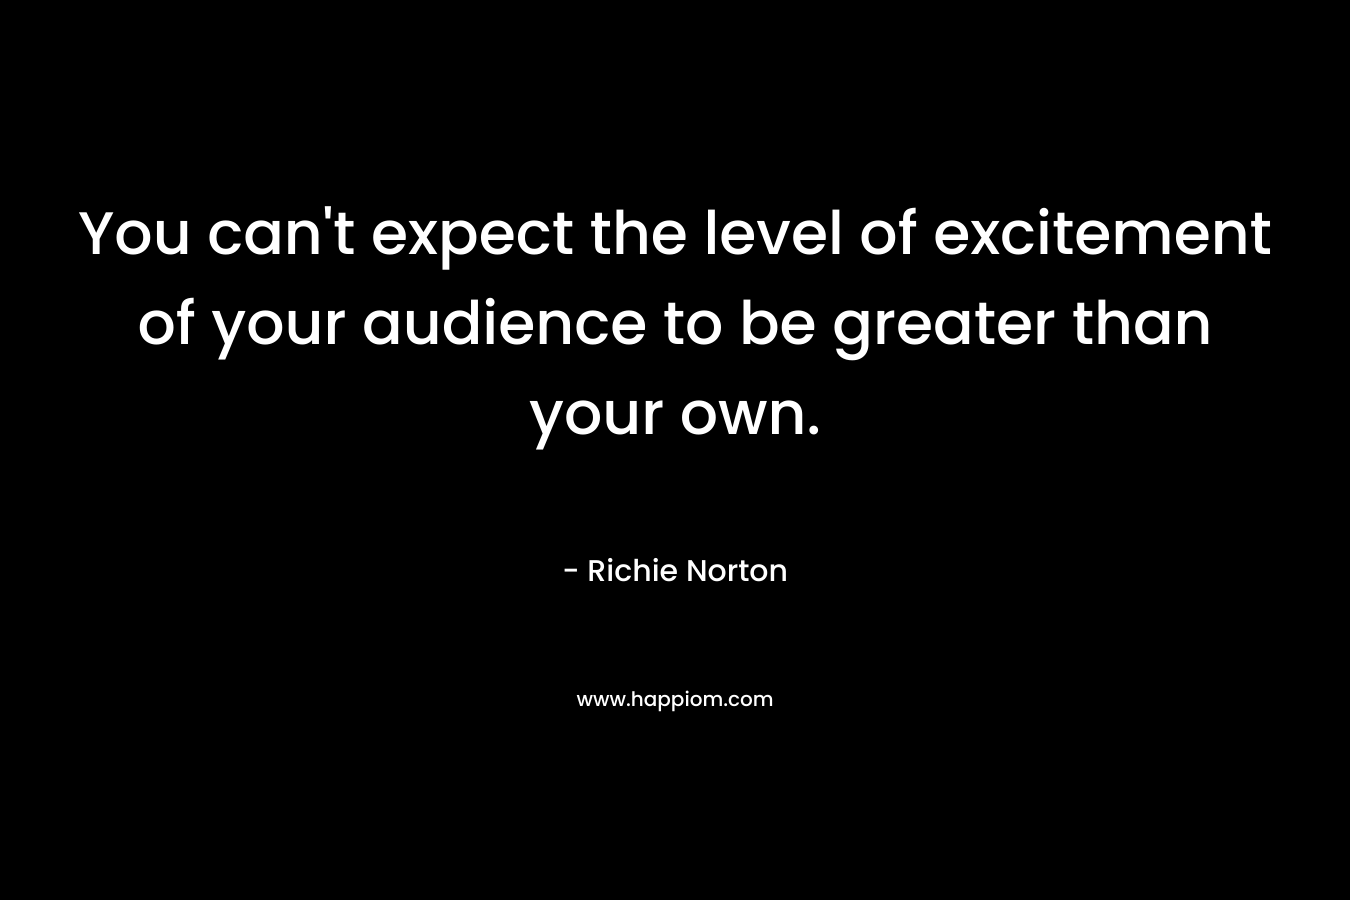 You can't expect the level of excitement of your audience to be greater than your own.